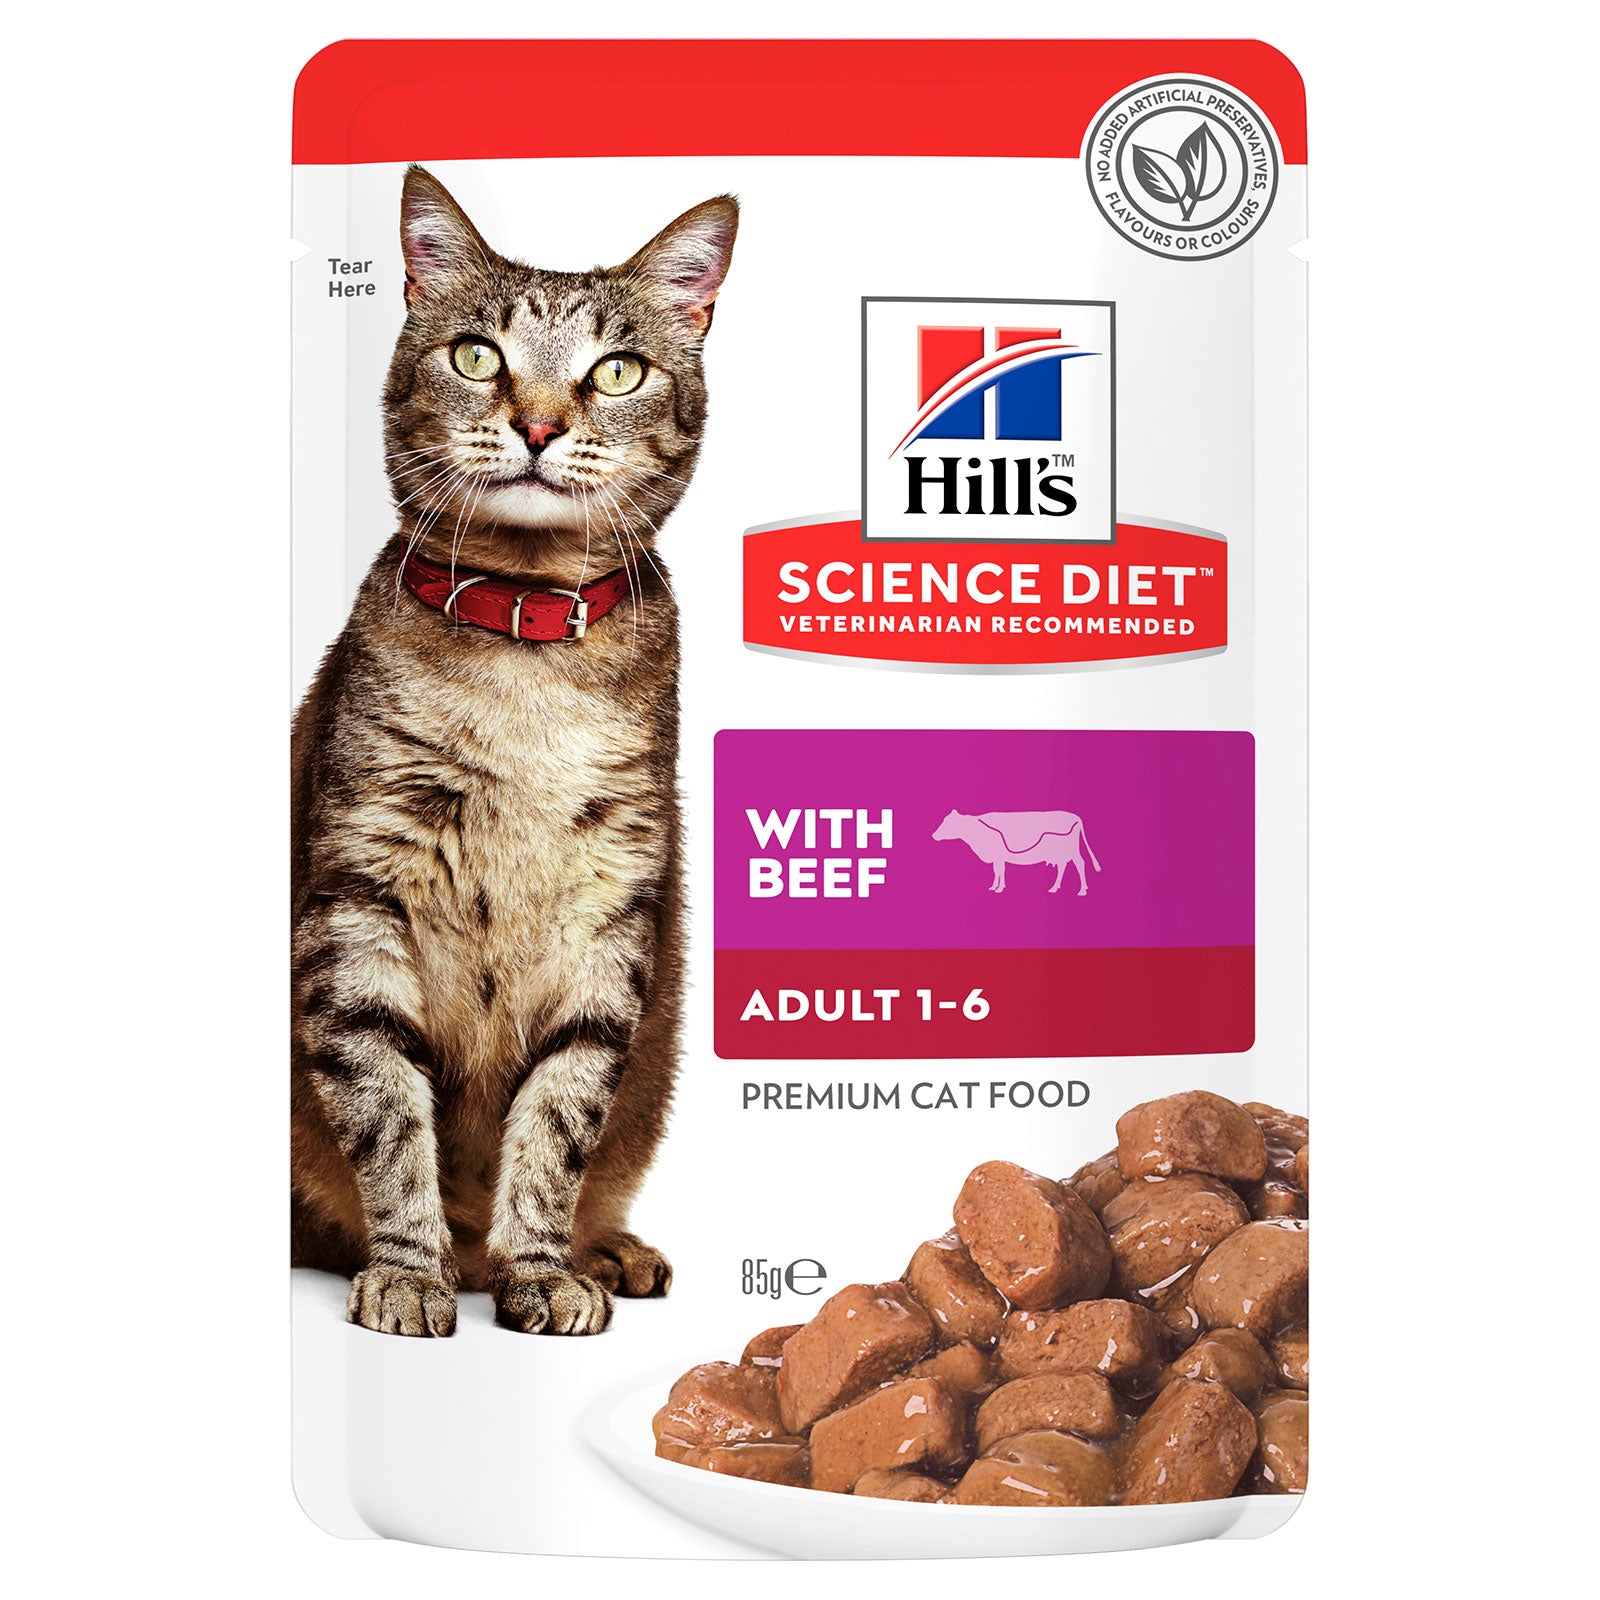 Hill's Science Diet Cat Food Pouch Adult Beef